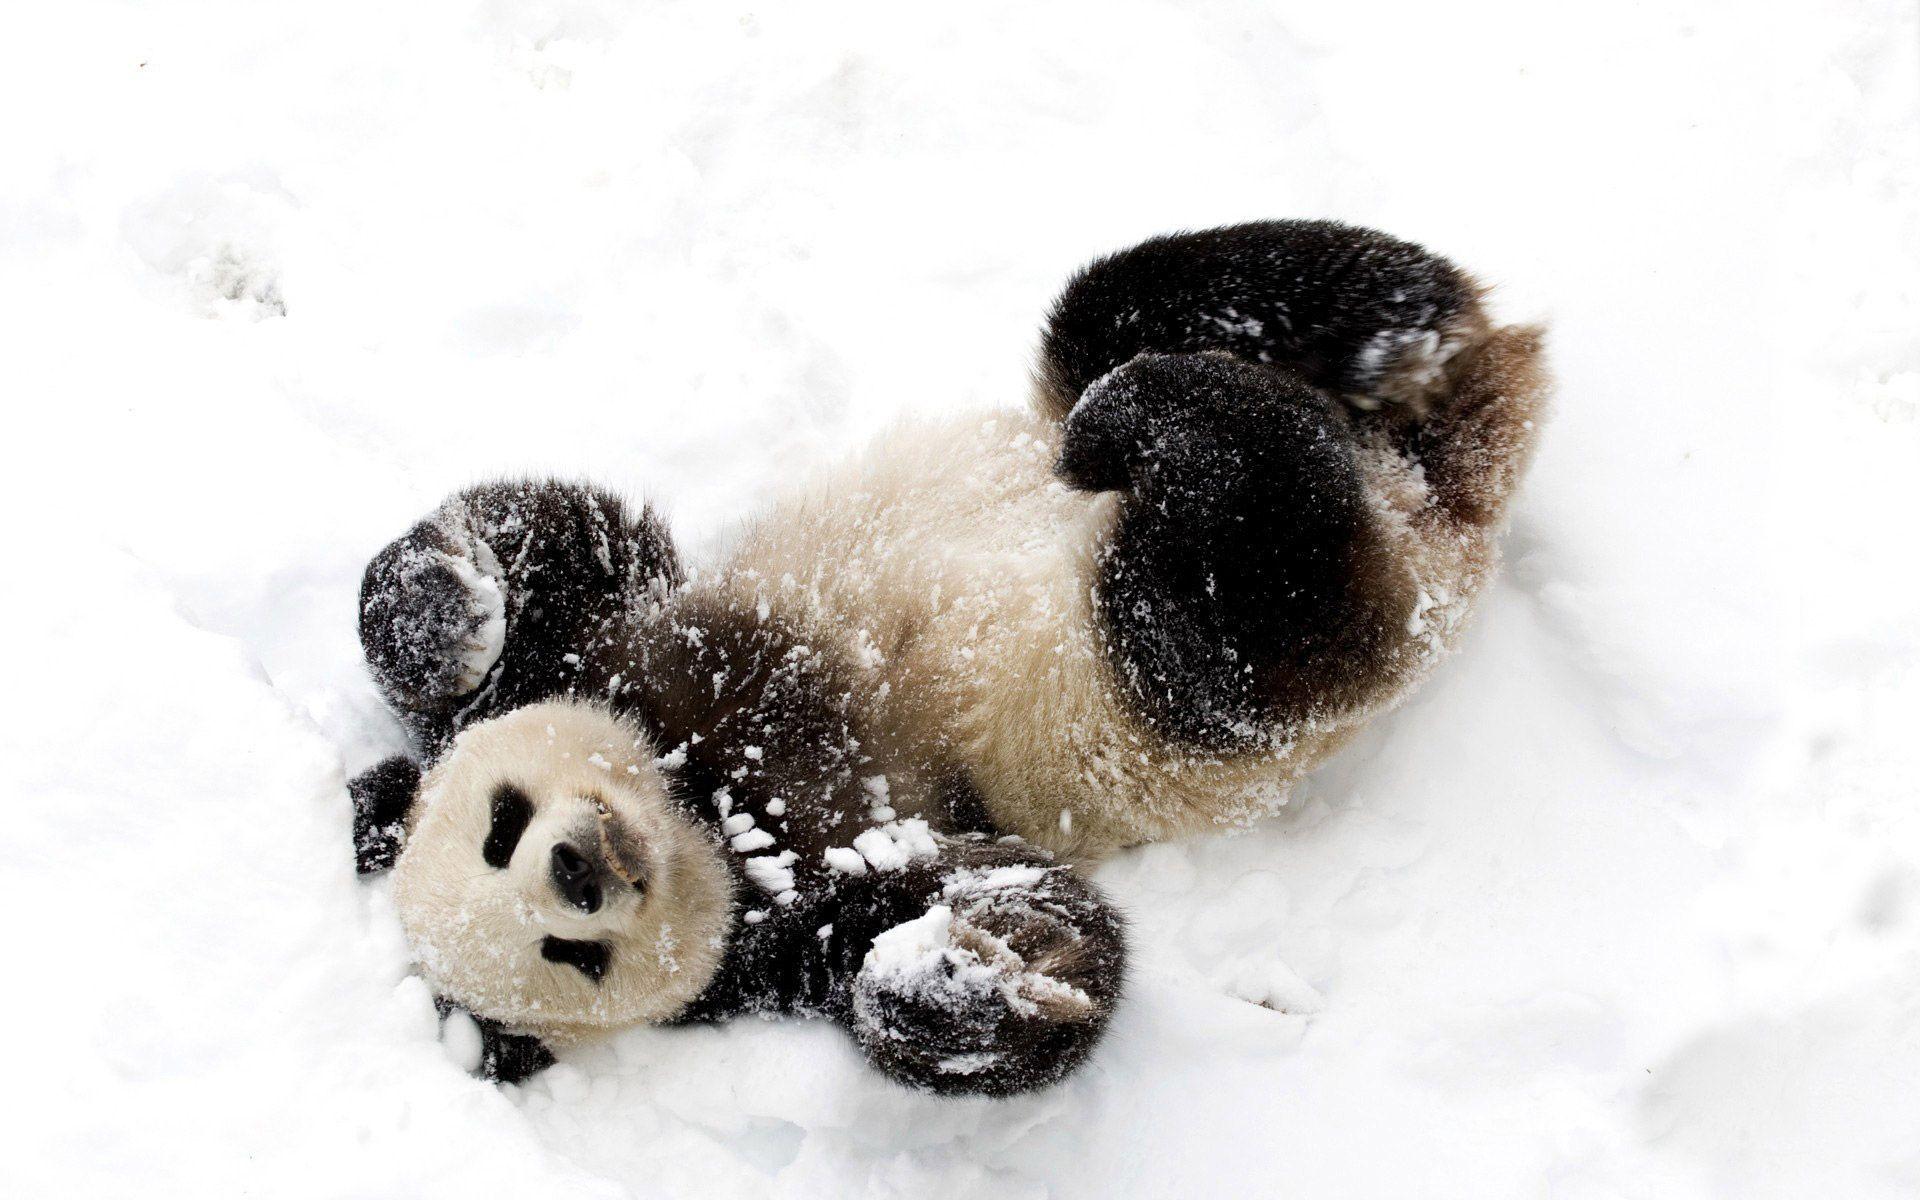 Panda Cubs in Snow HD Wallpaper, Background Image